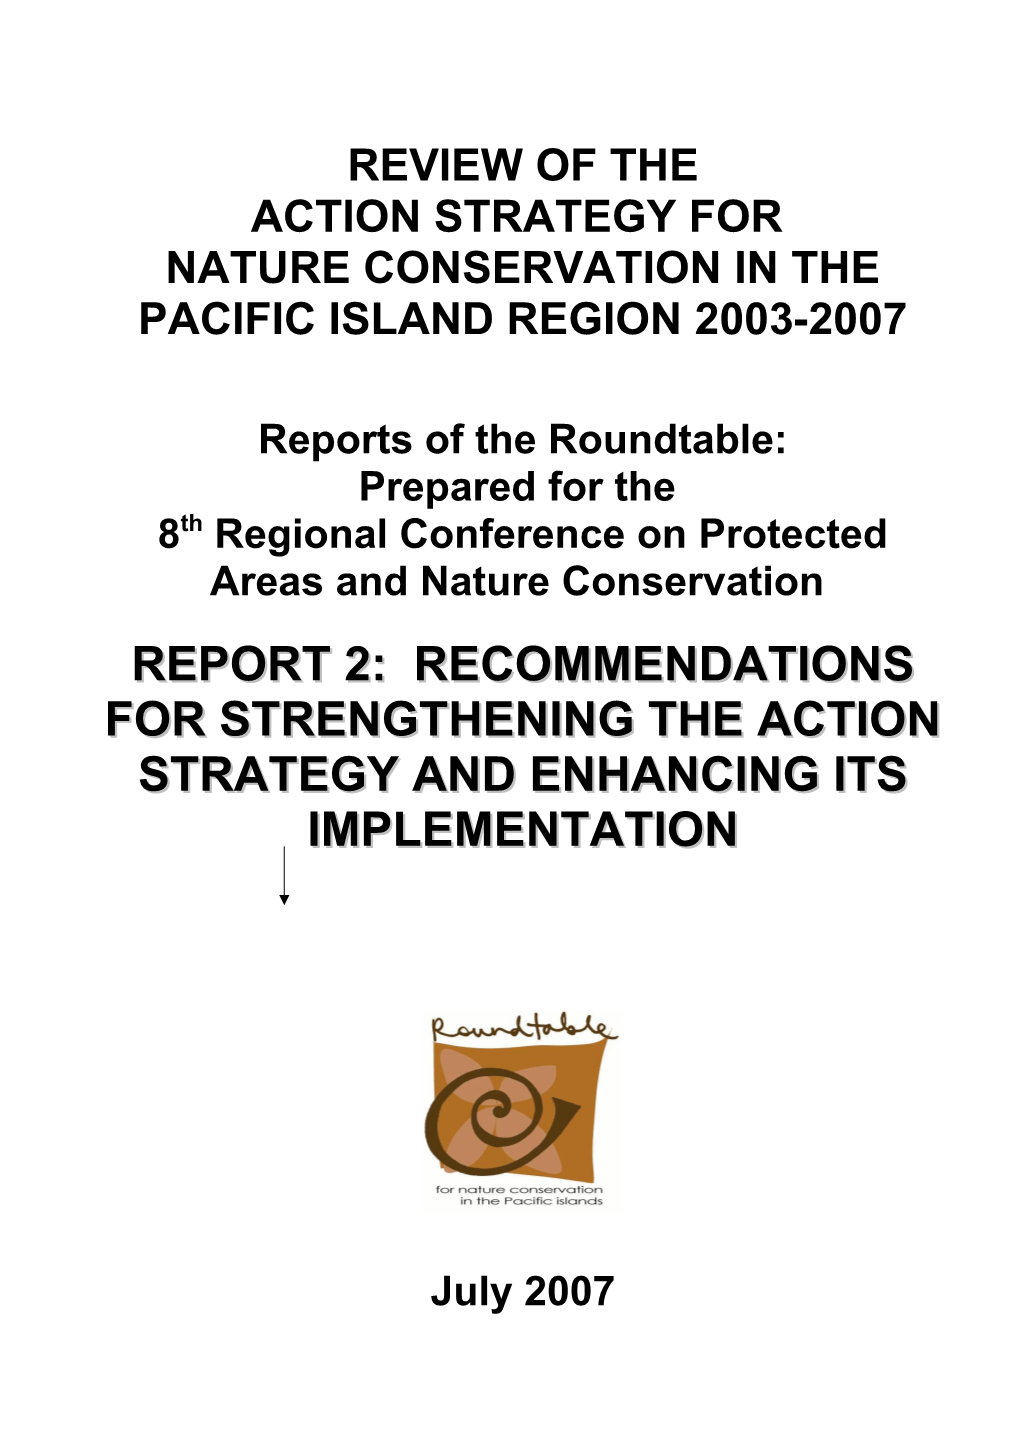 Nature Conservation in the Pacific Island Region 2003-2007